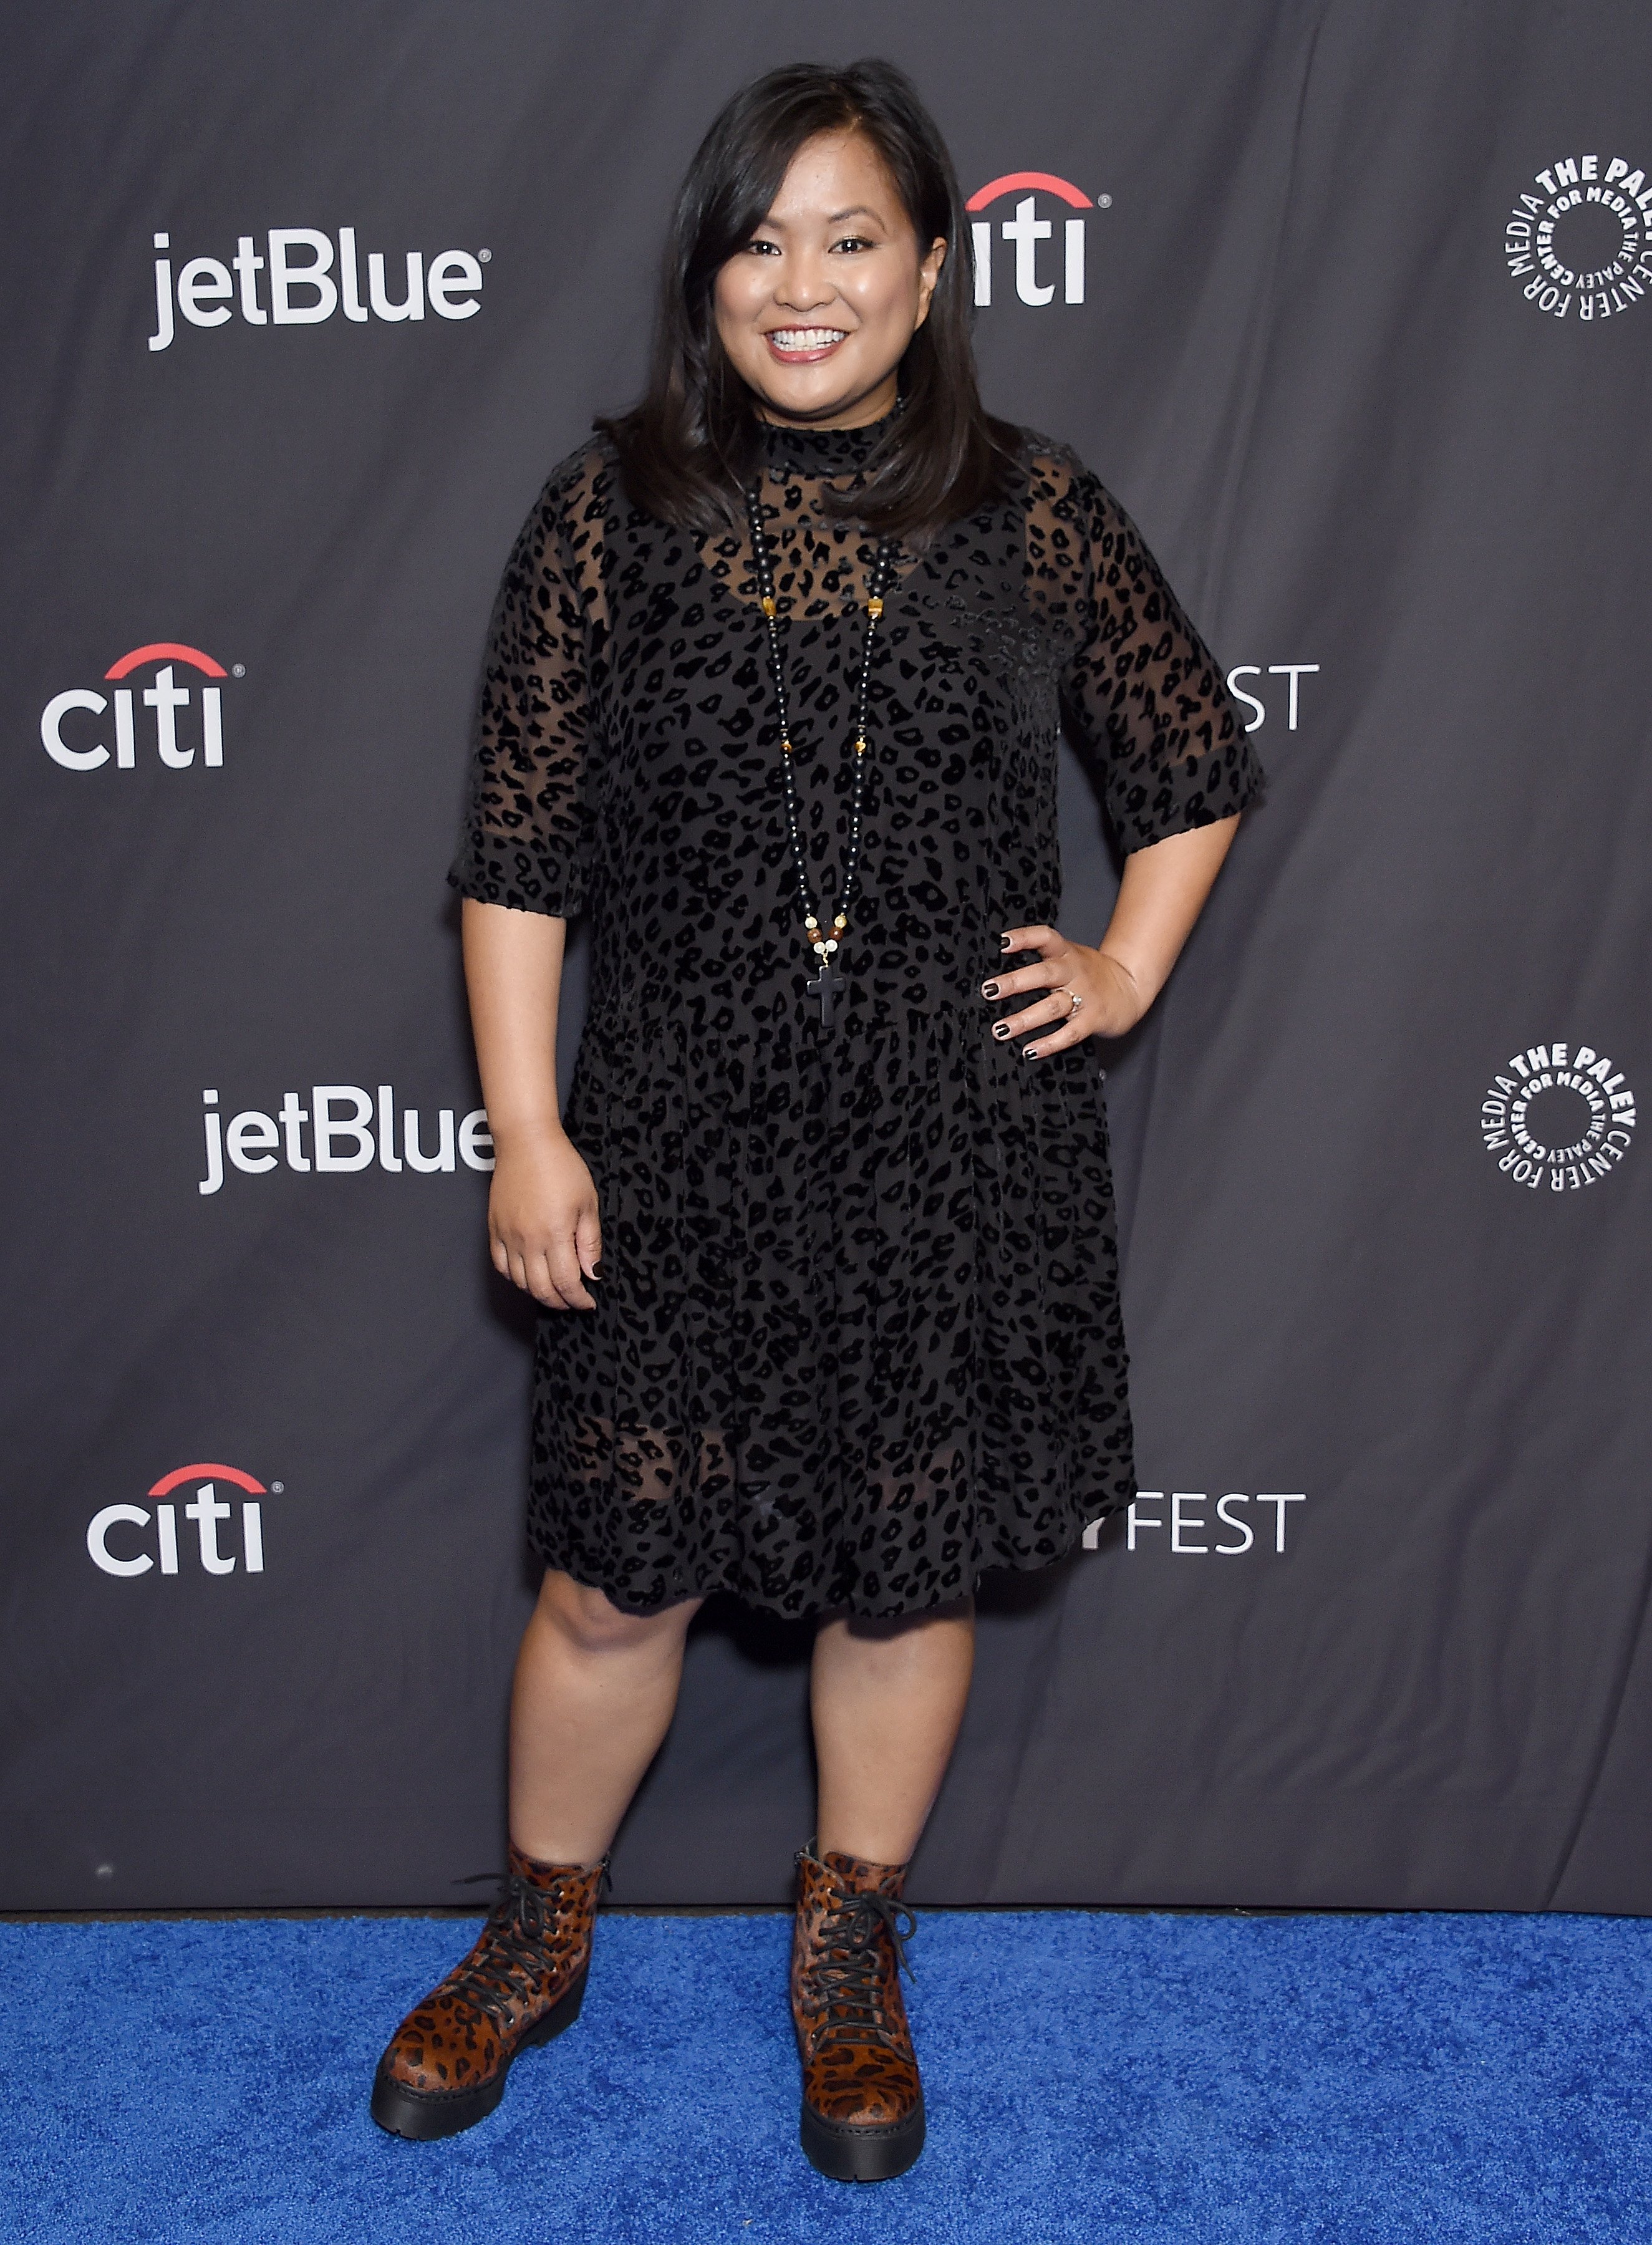 Kimee Balmilero attends The Paley Center For Media's 2019 PaleyFest LA - "Hawaii Five-0", "MacGyver", And "Magnum P.I." at Dolby Theatre on March 23, 2019 | Photo: GettyImages